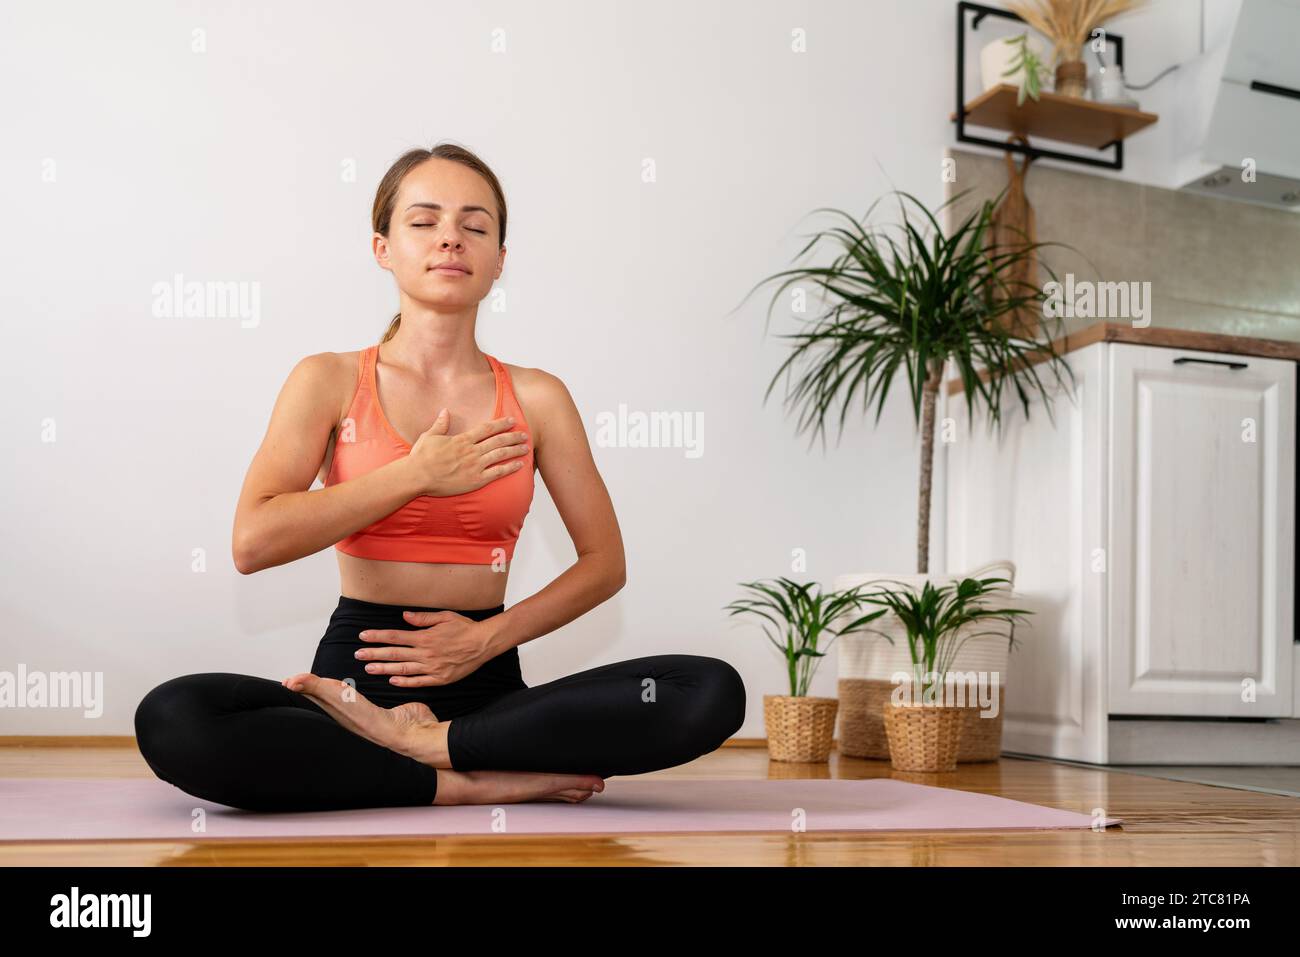 Serene meditation at home with yoga. Woman doing breathing exercise while sitting in lotus pose on yoga mat. Stock Photo